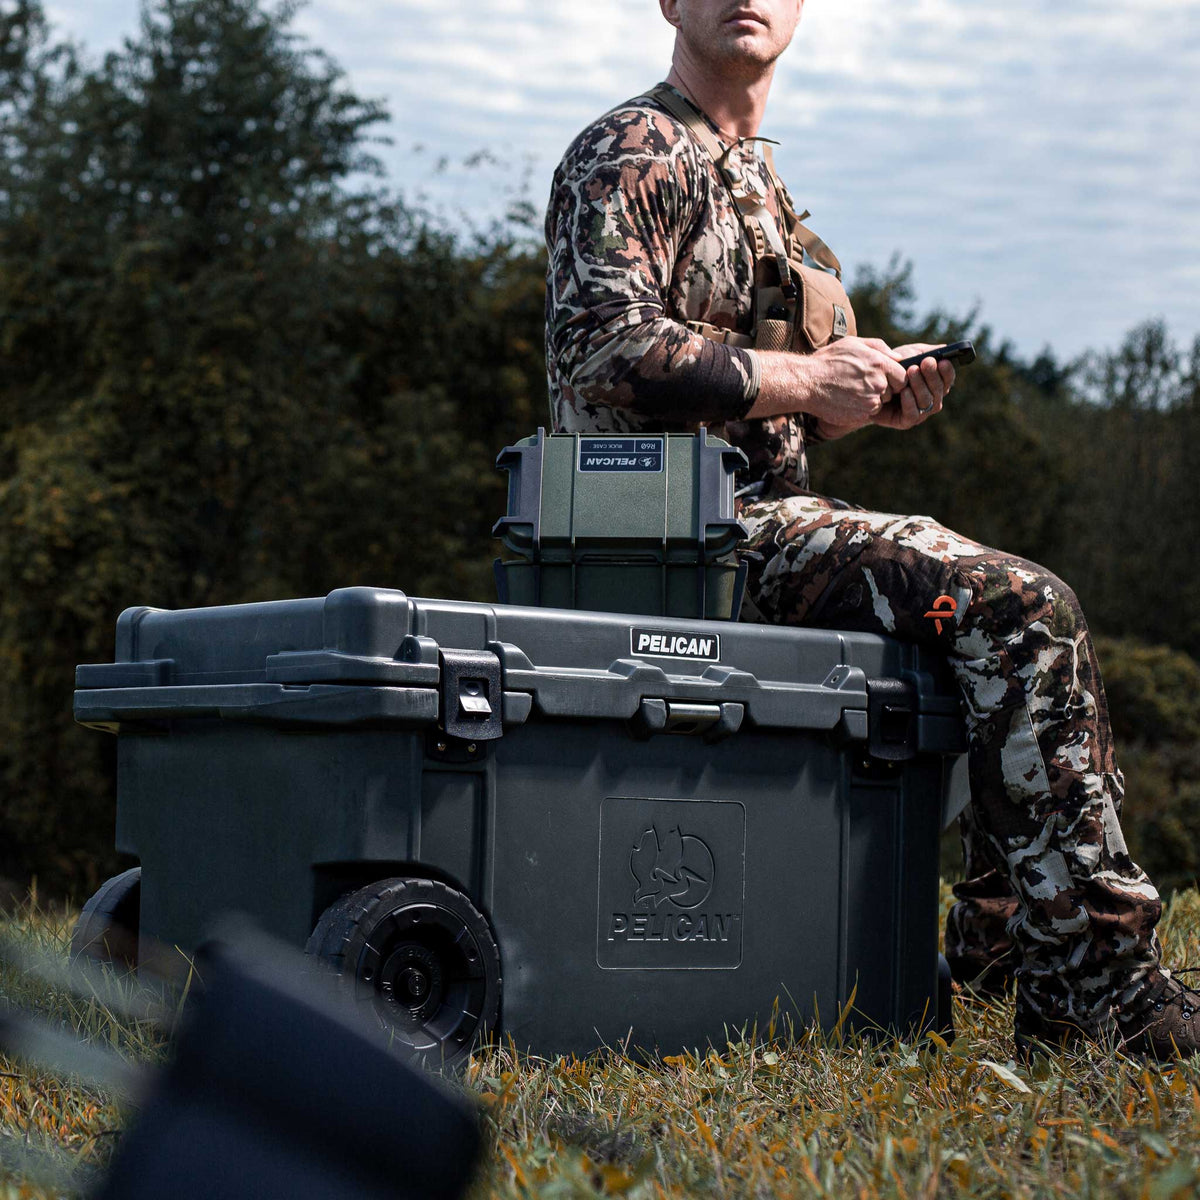 Charcoal Pelican 80QT Elite Wheeled Cooler in charcoal being used as a seat outside during a hunt